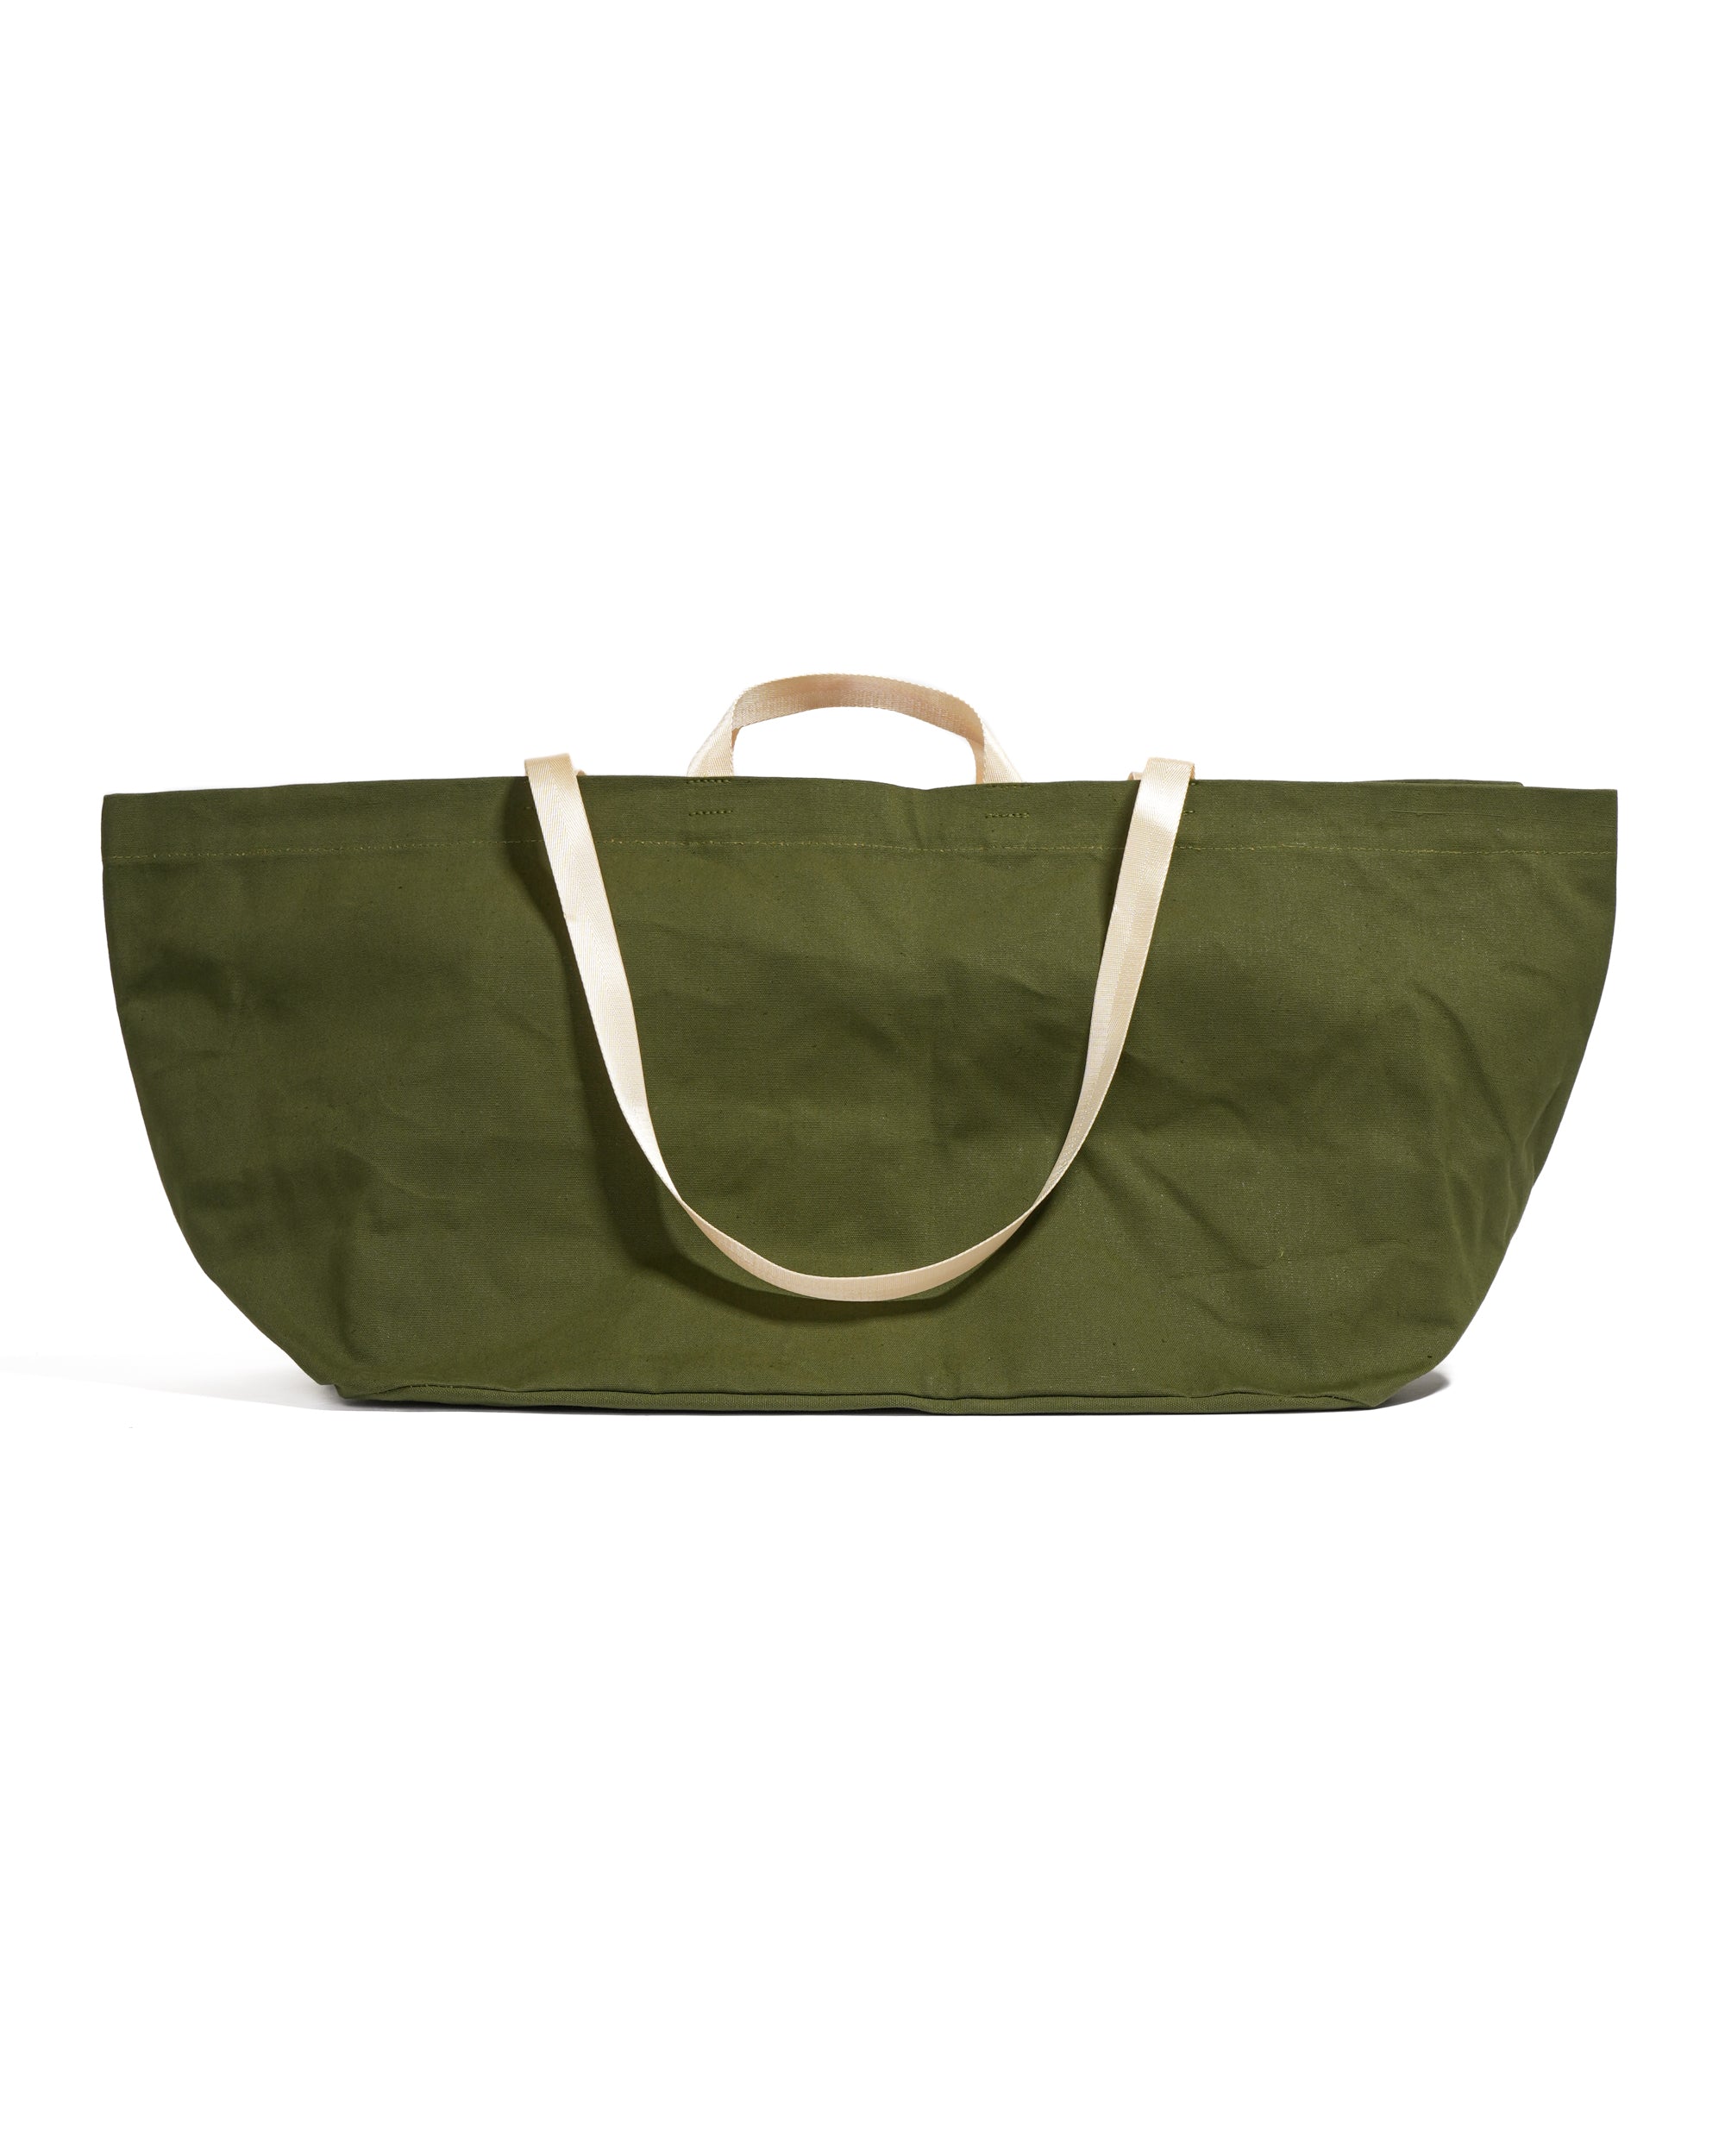 EG Canvas Carrier Bag - Olive - Recycled Assorted